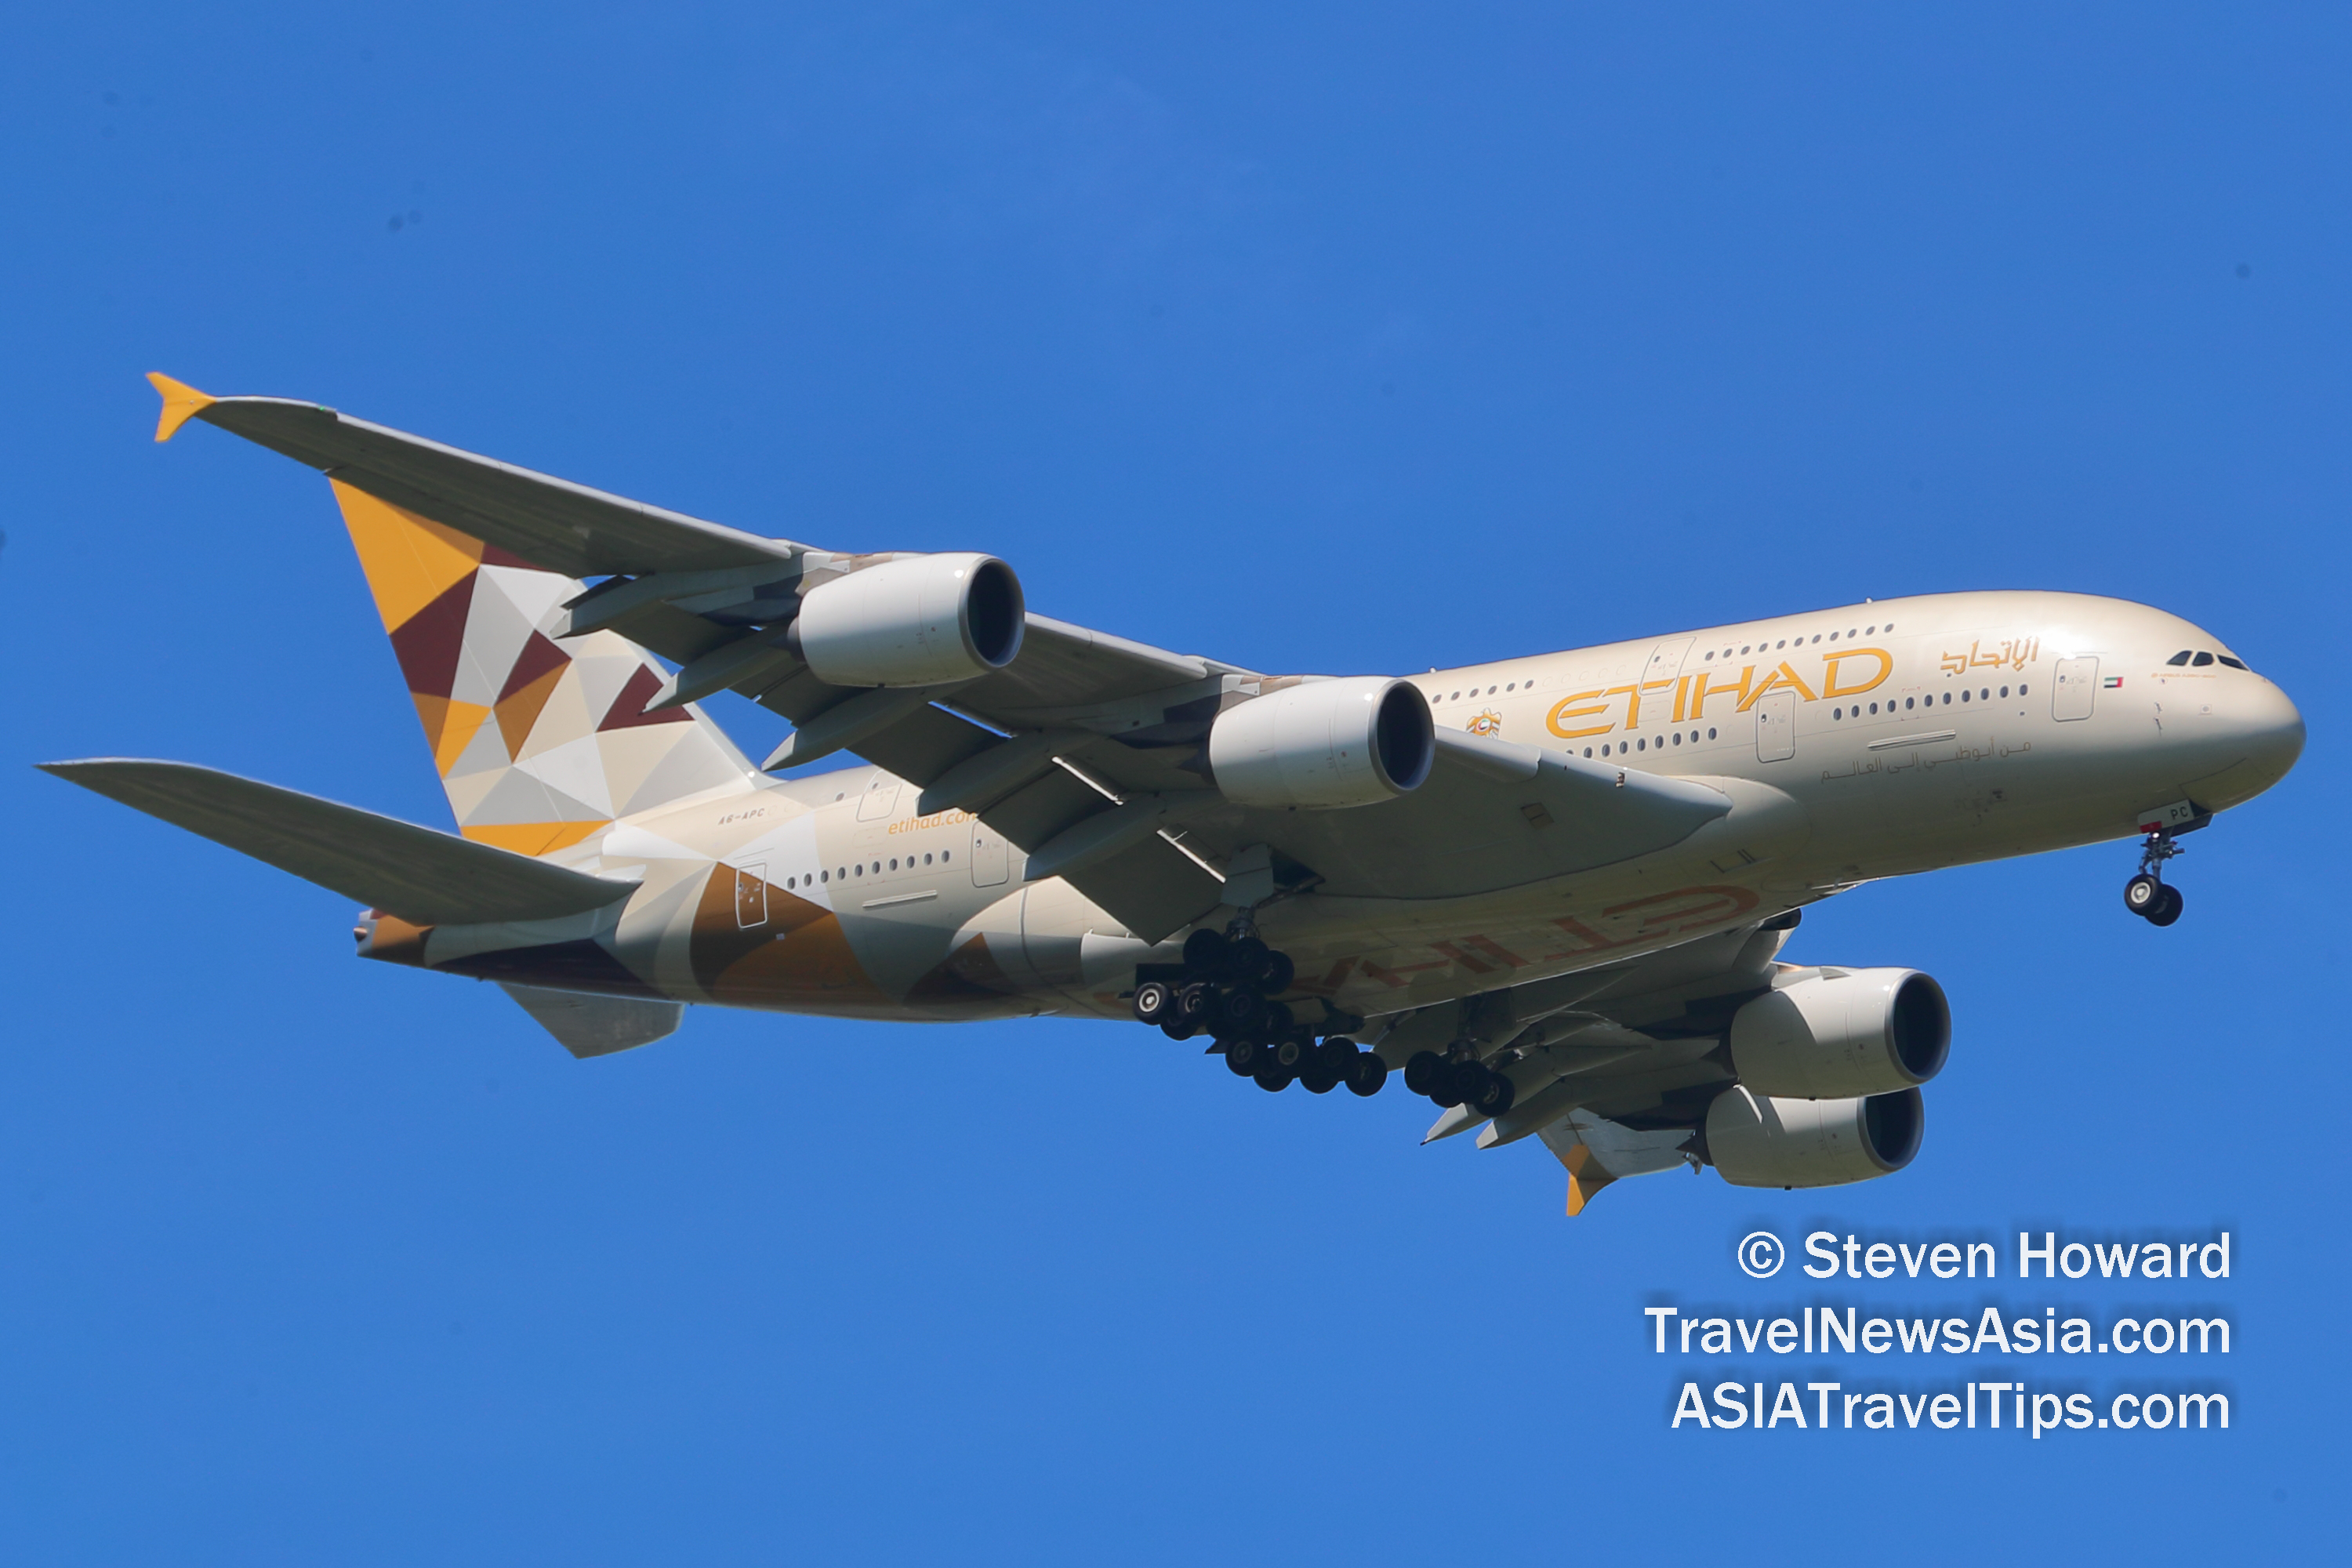 Etihad Airways has grounded its fleet of ten Airbus A380s. Picture of Etihad Airways' Airbus A380 reg: A6-APC by Steven Howard of TravelNewsAsia.com Click to enlarge.